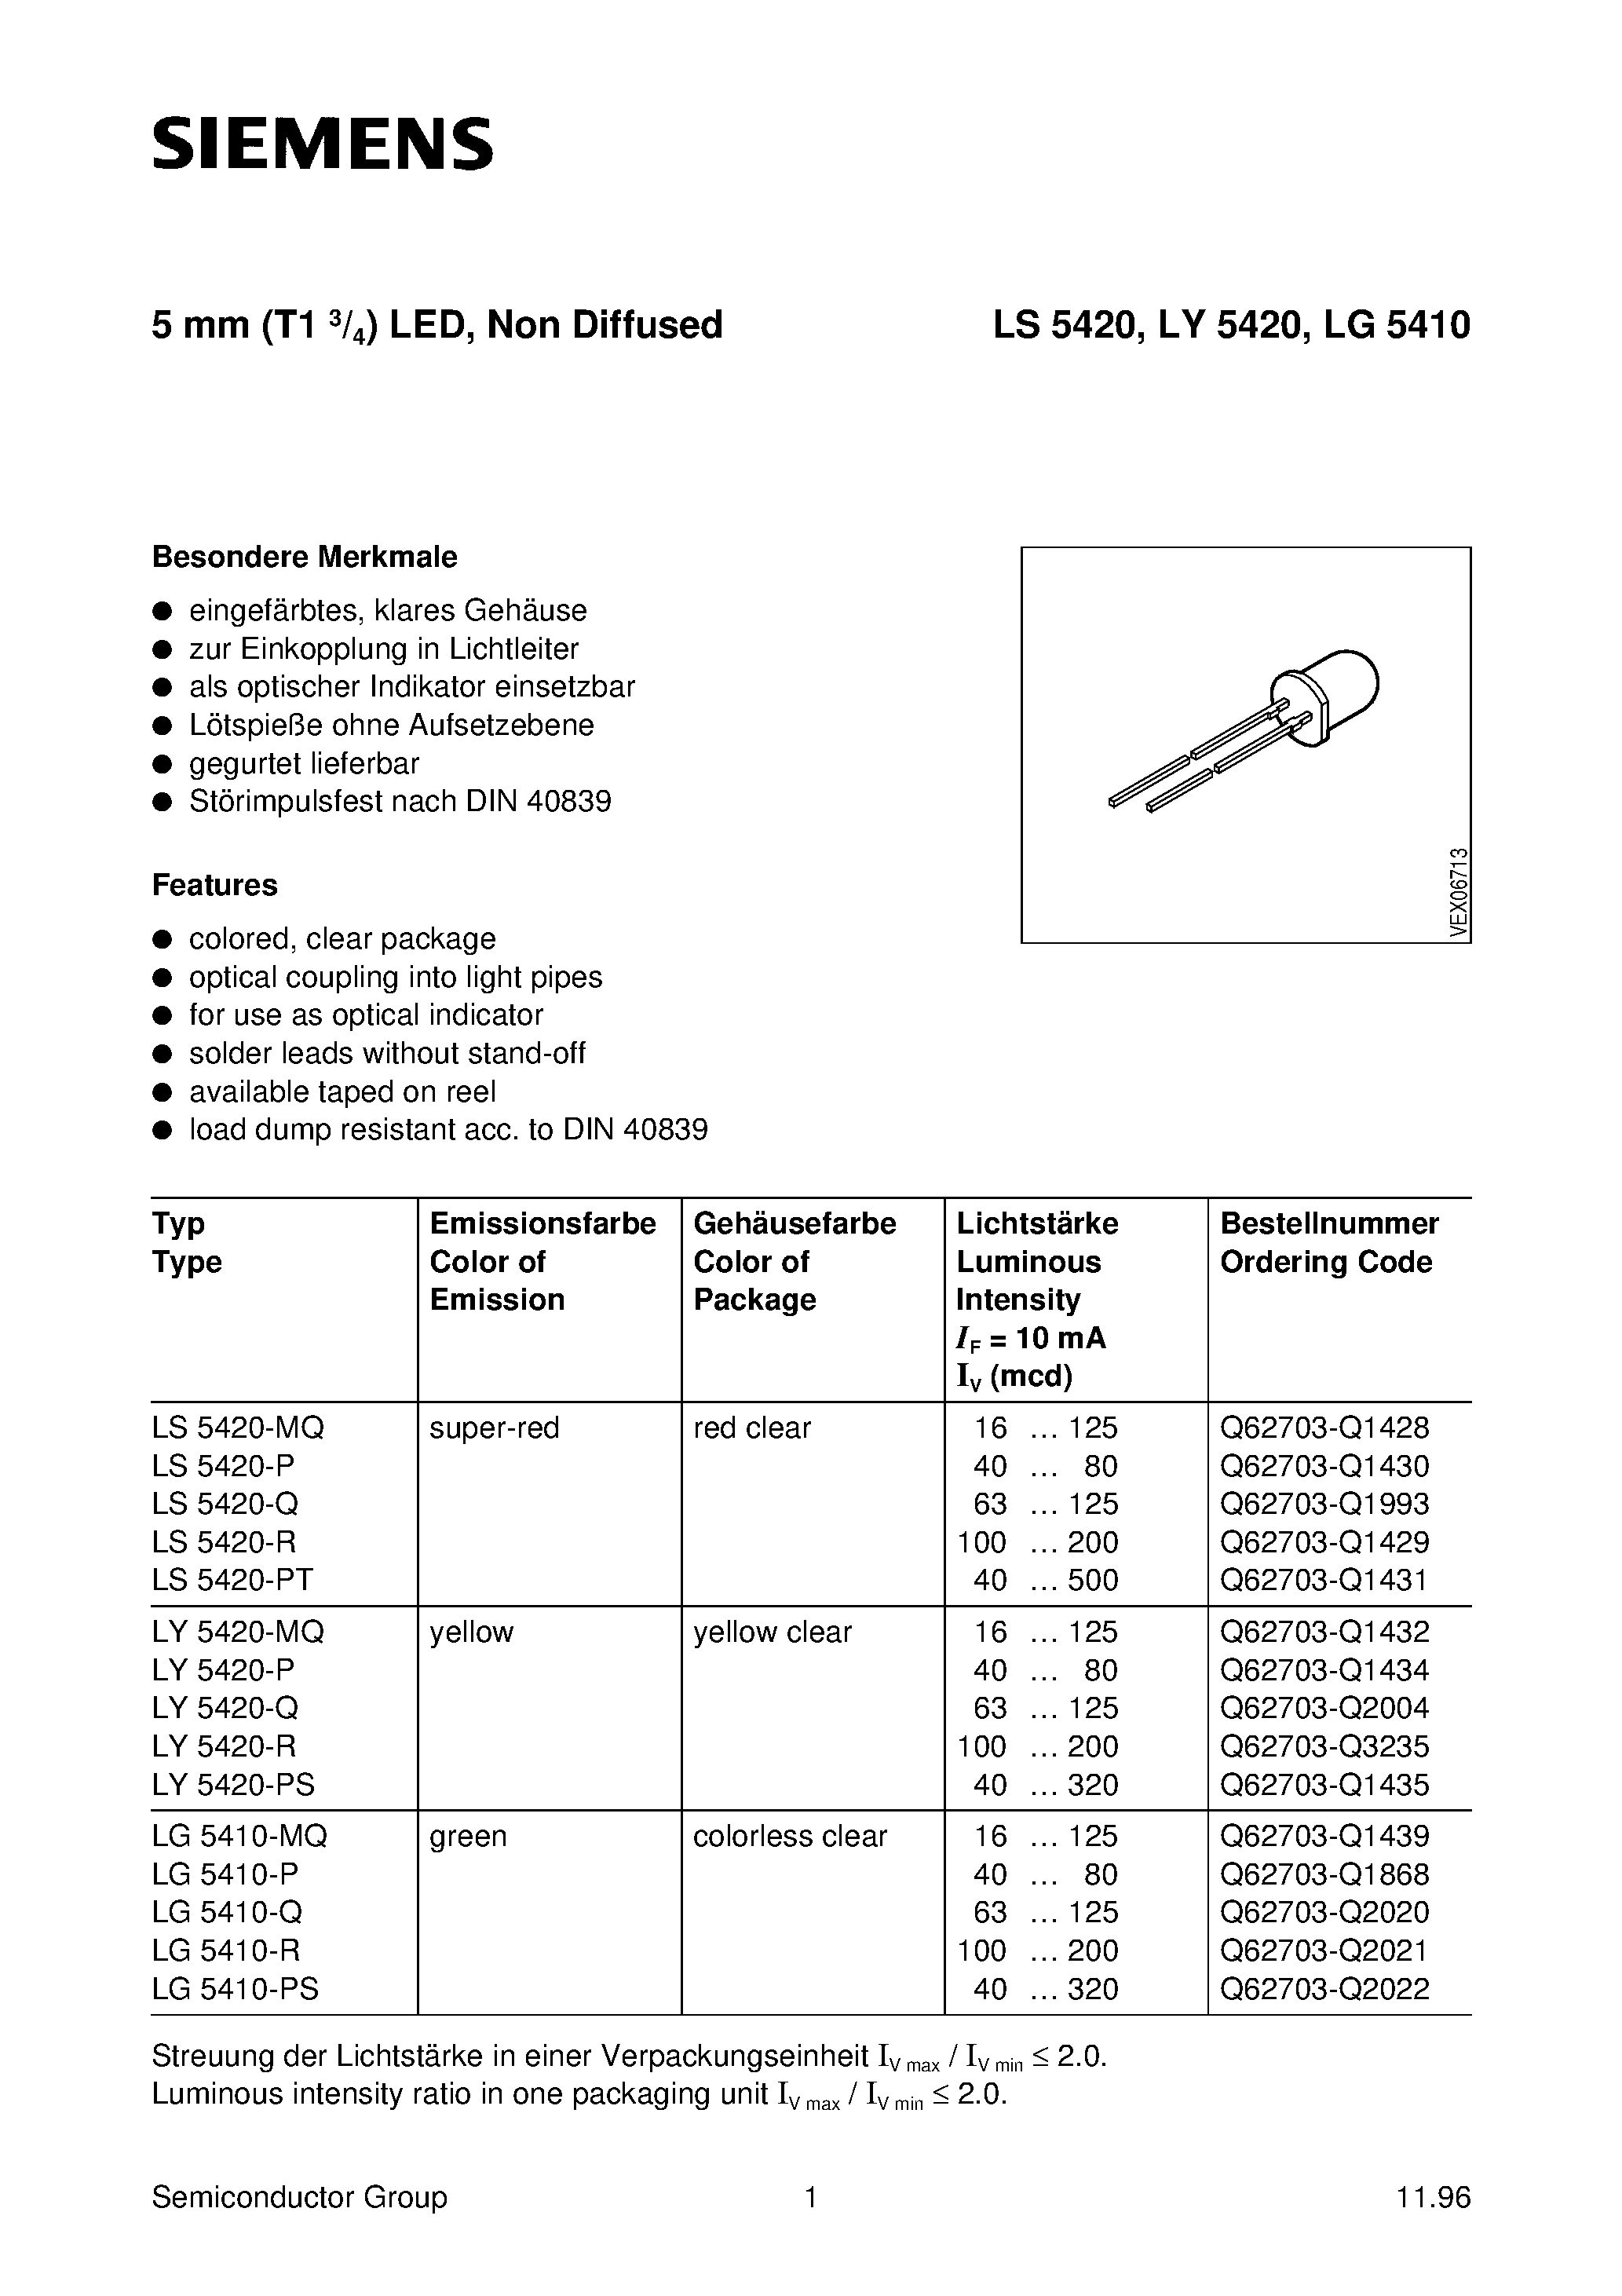 Datasheet LY5420-Q - 5 mm (T1 3/4) LED/ Non Diffused page 1